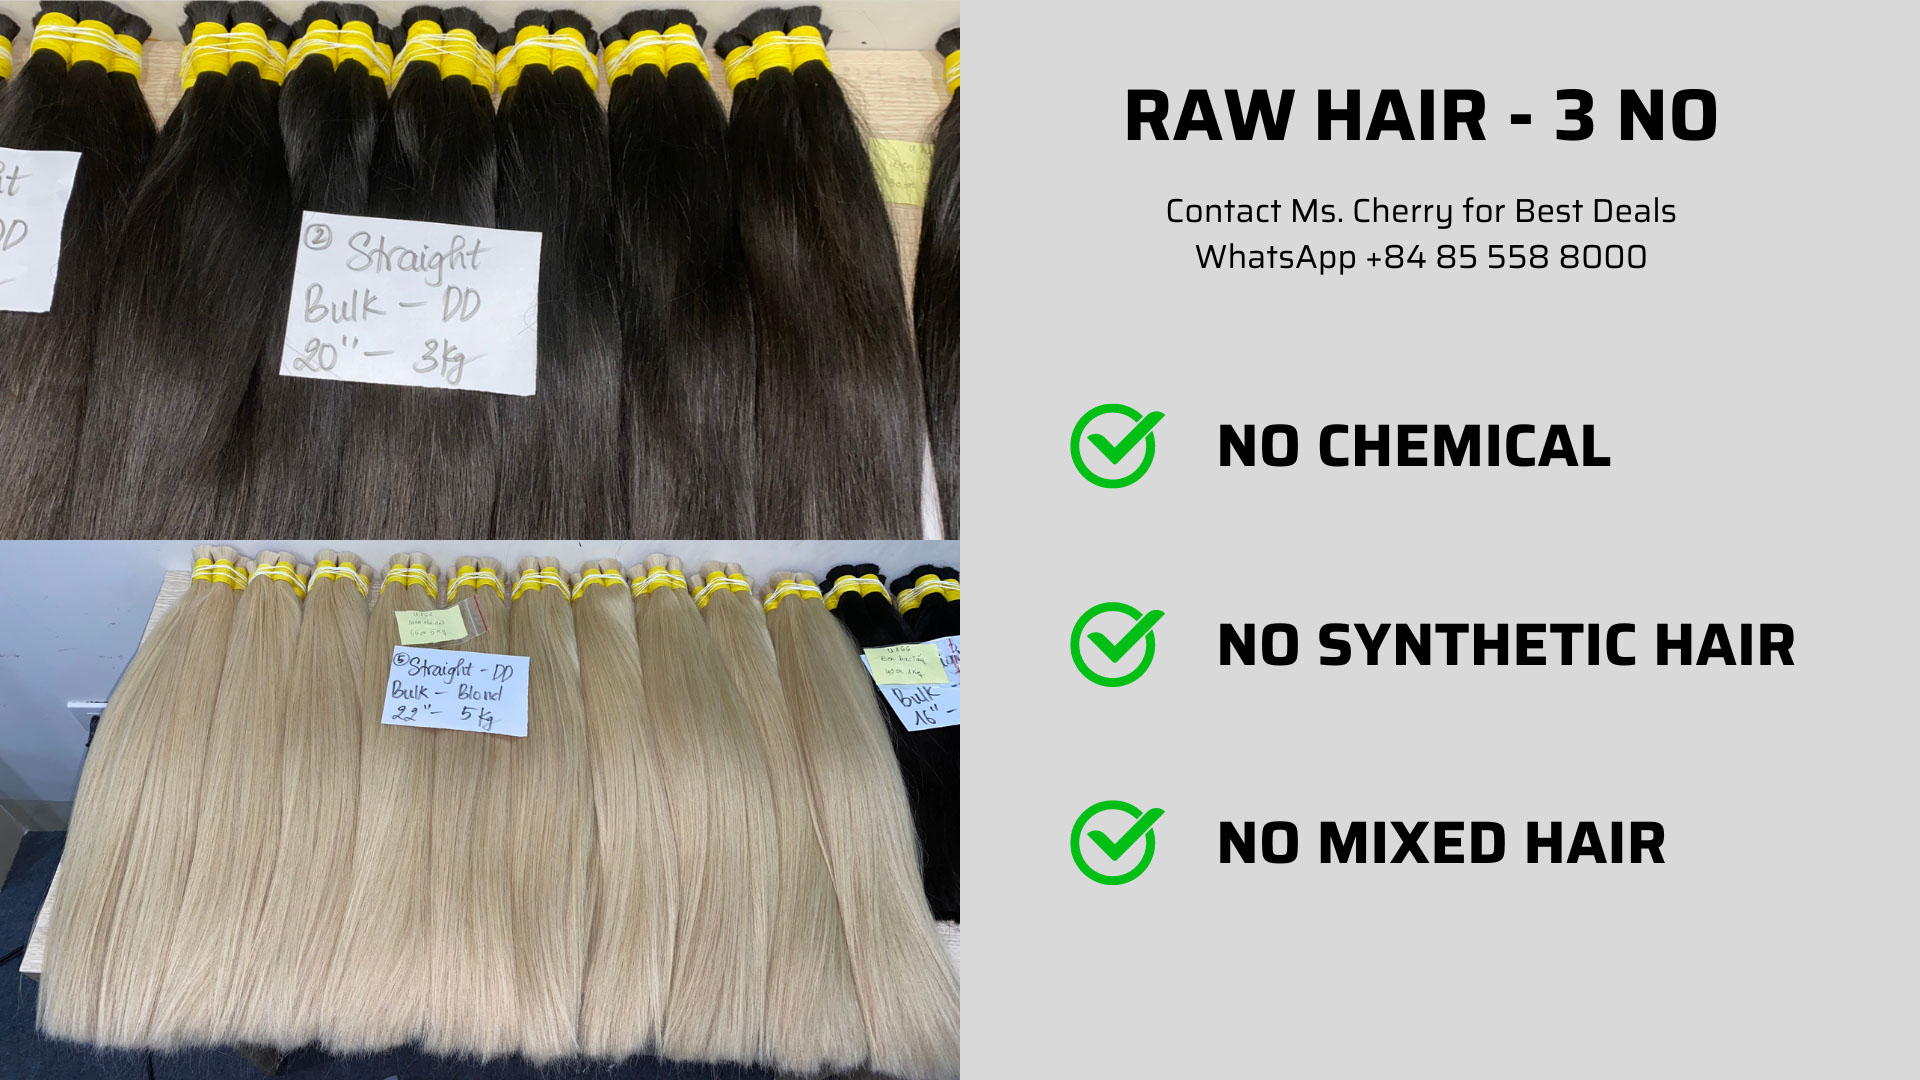 “3 NO” of hair from wholesale hair vendors